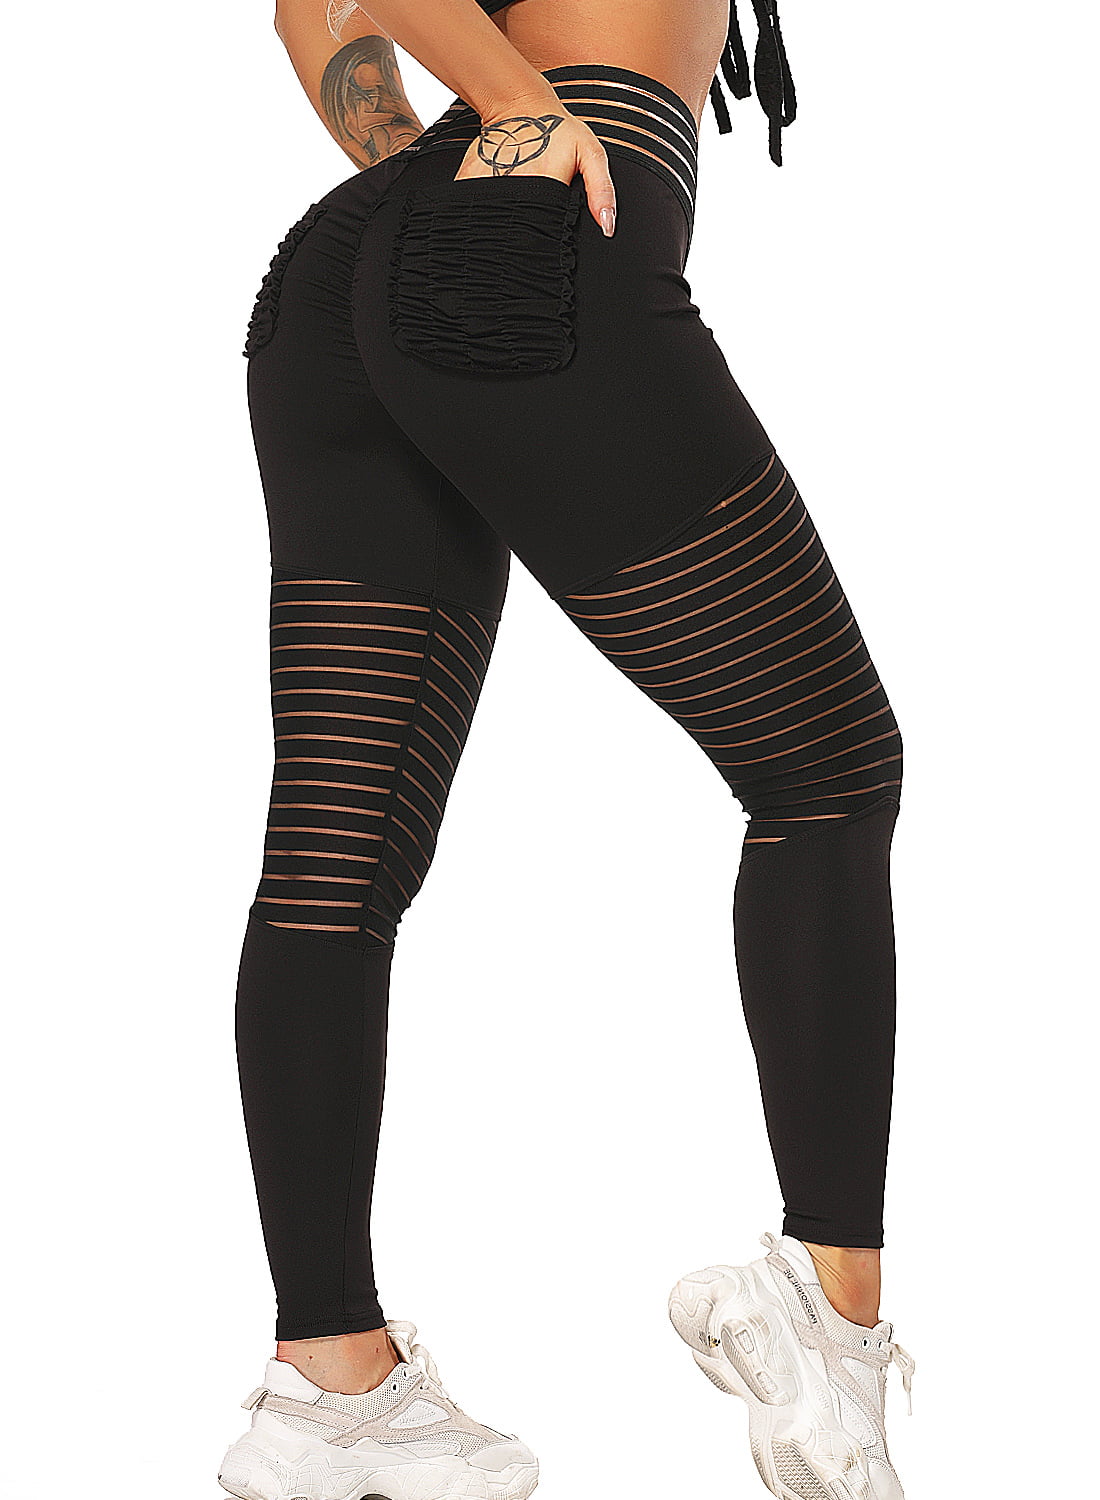 POTO Leggings for Women High Waisted,Womens Yoga Pants Butt Lift Tummy Control Tights Striped Mesh Workout Sweatpants 